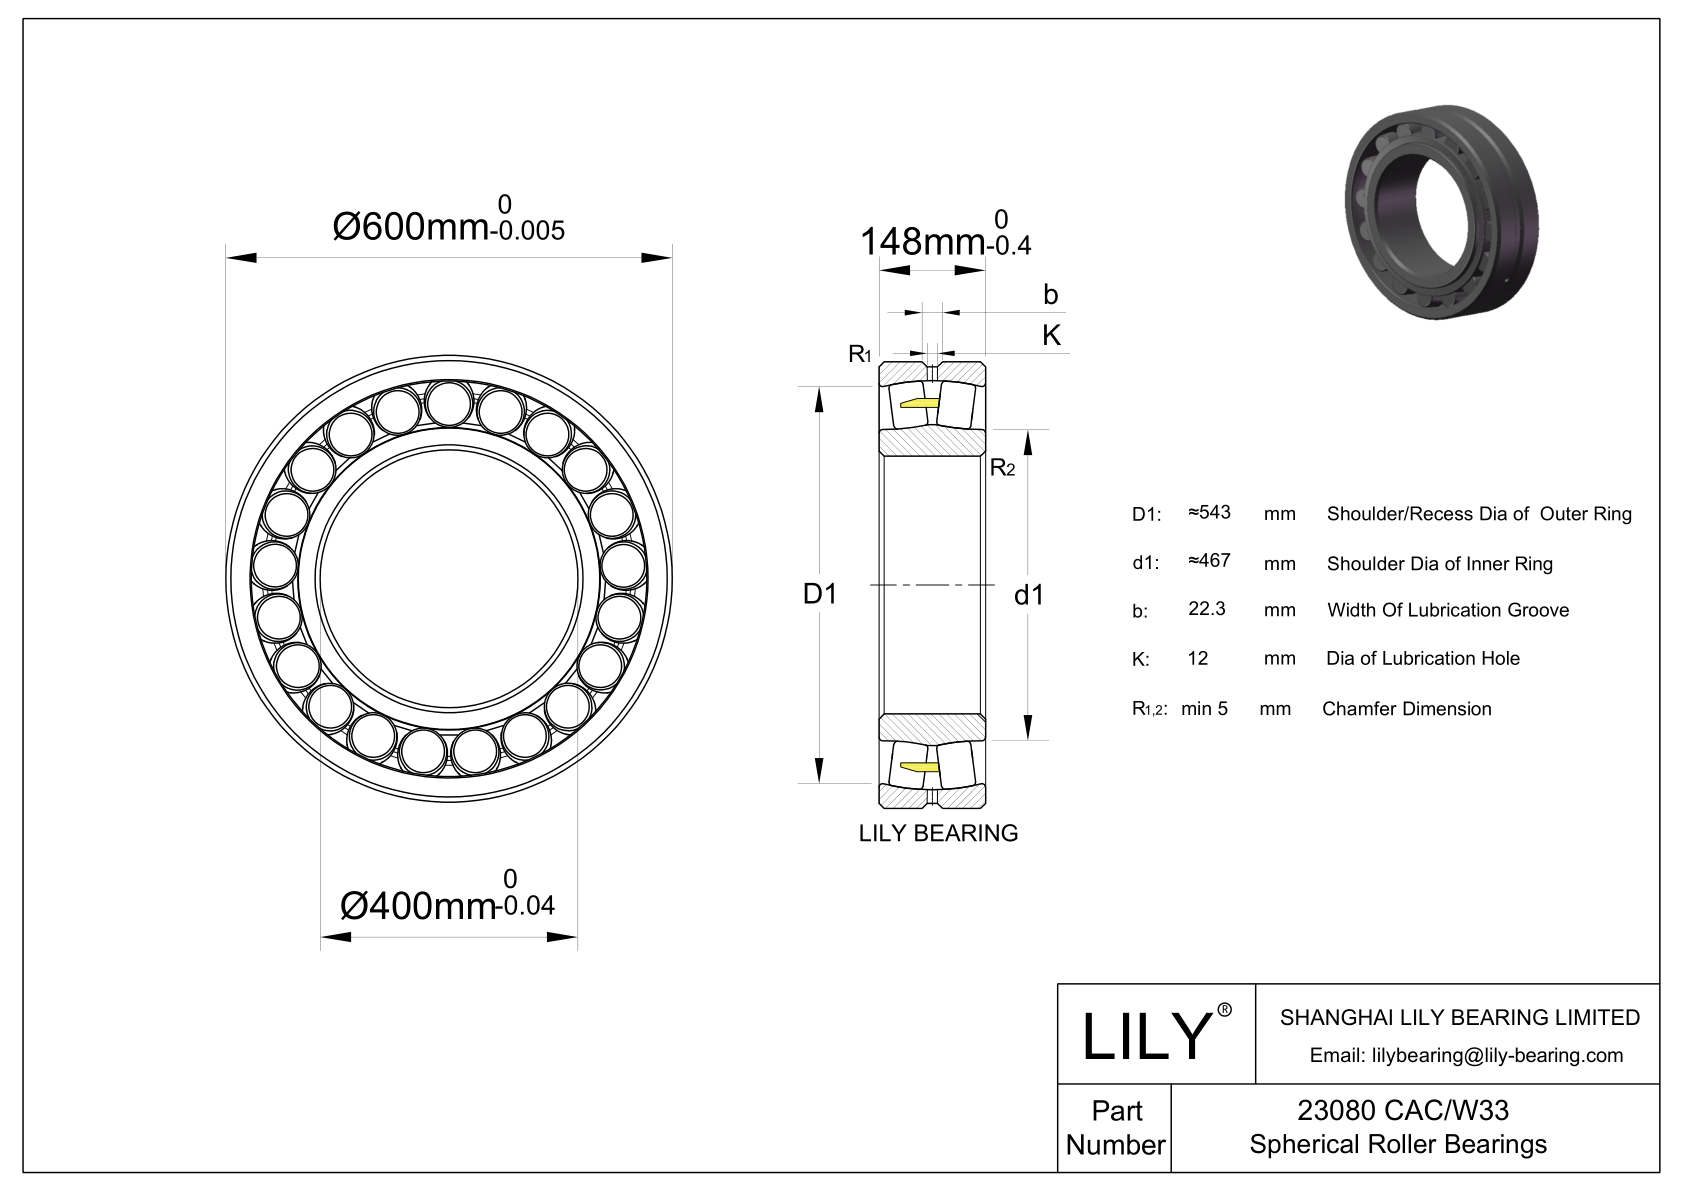 23080 CAC/W33 Double Row Spherical Roller Bearing cad drawing